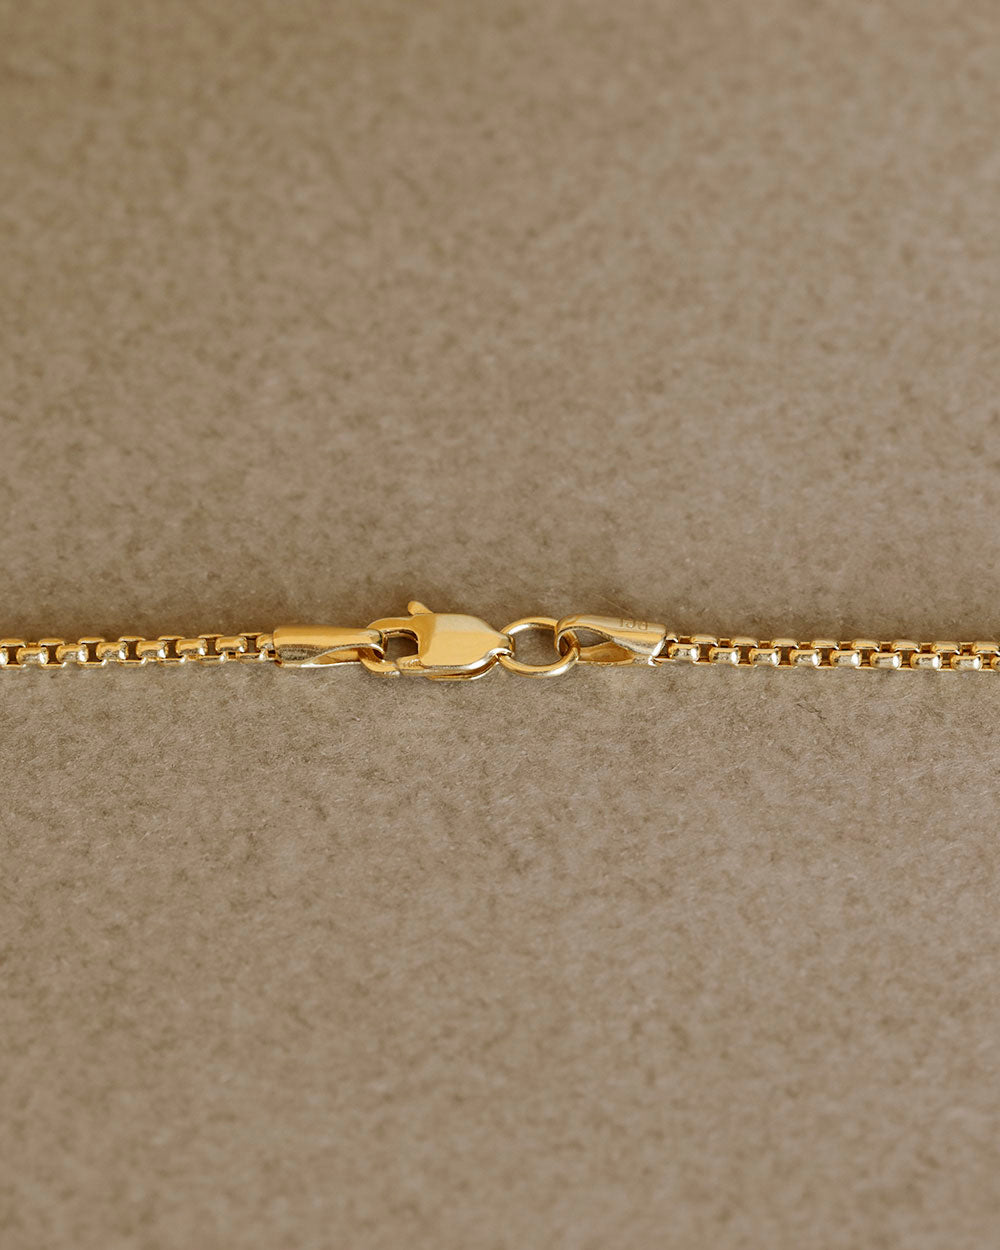 Solid gold box chain by George Rings 14k yellow gold in sizes 18" 20" 22" 24" with a lobster clasp.